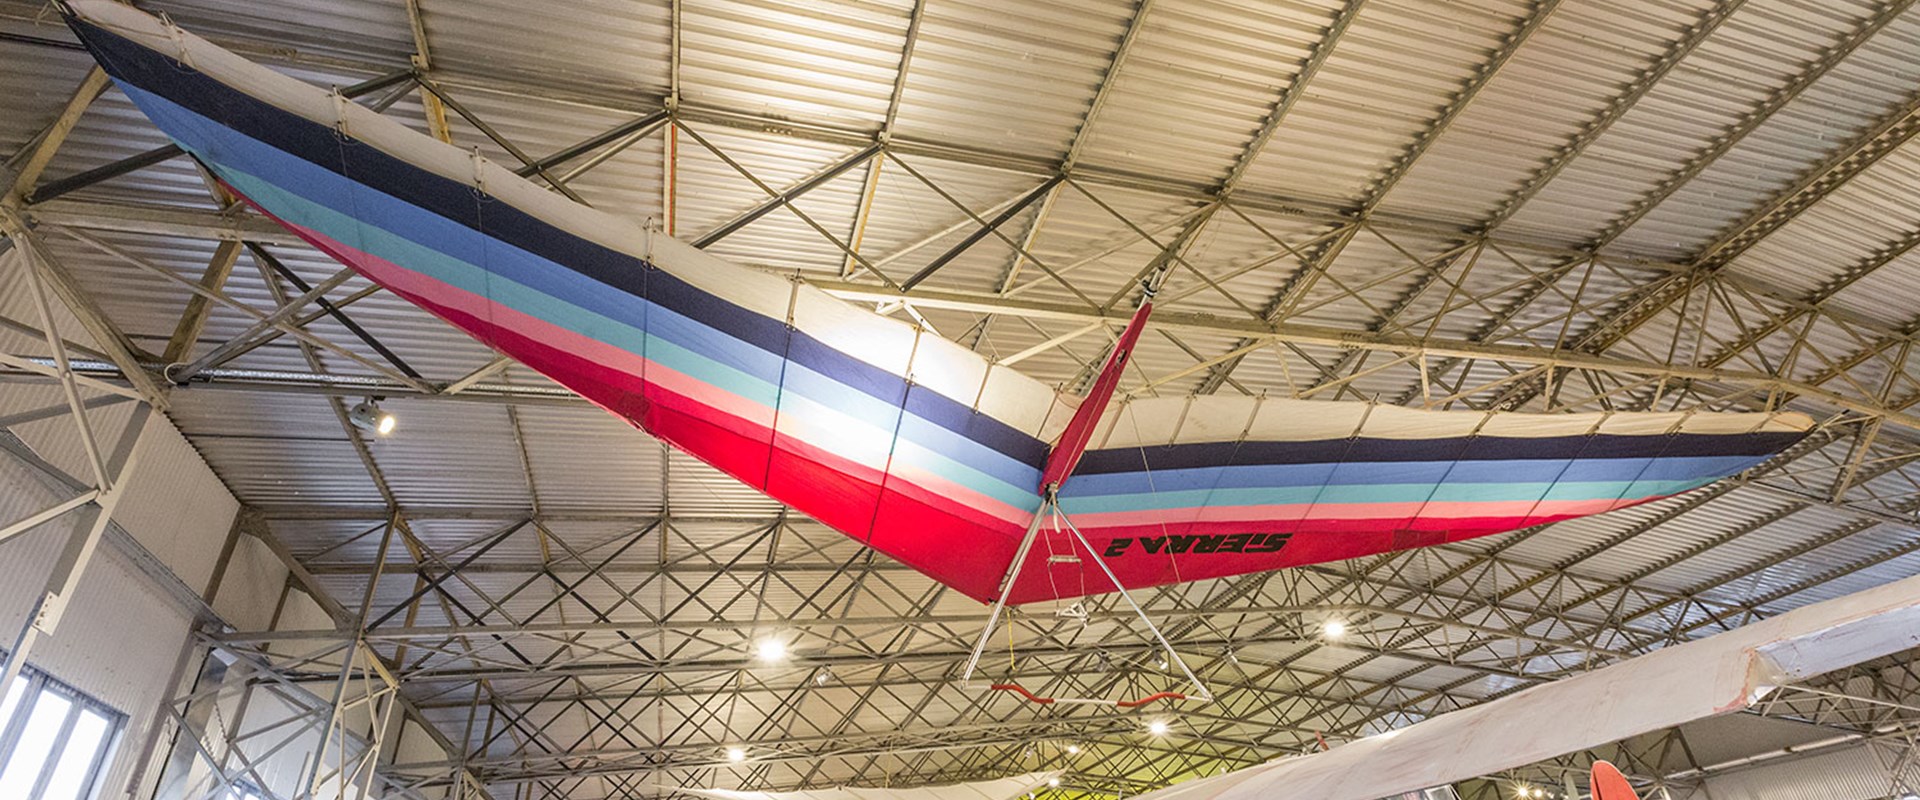 A mutlicoloured hang glider suspended from the ceiling of a hangar at the National Museum of Flight.